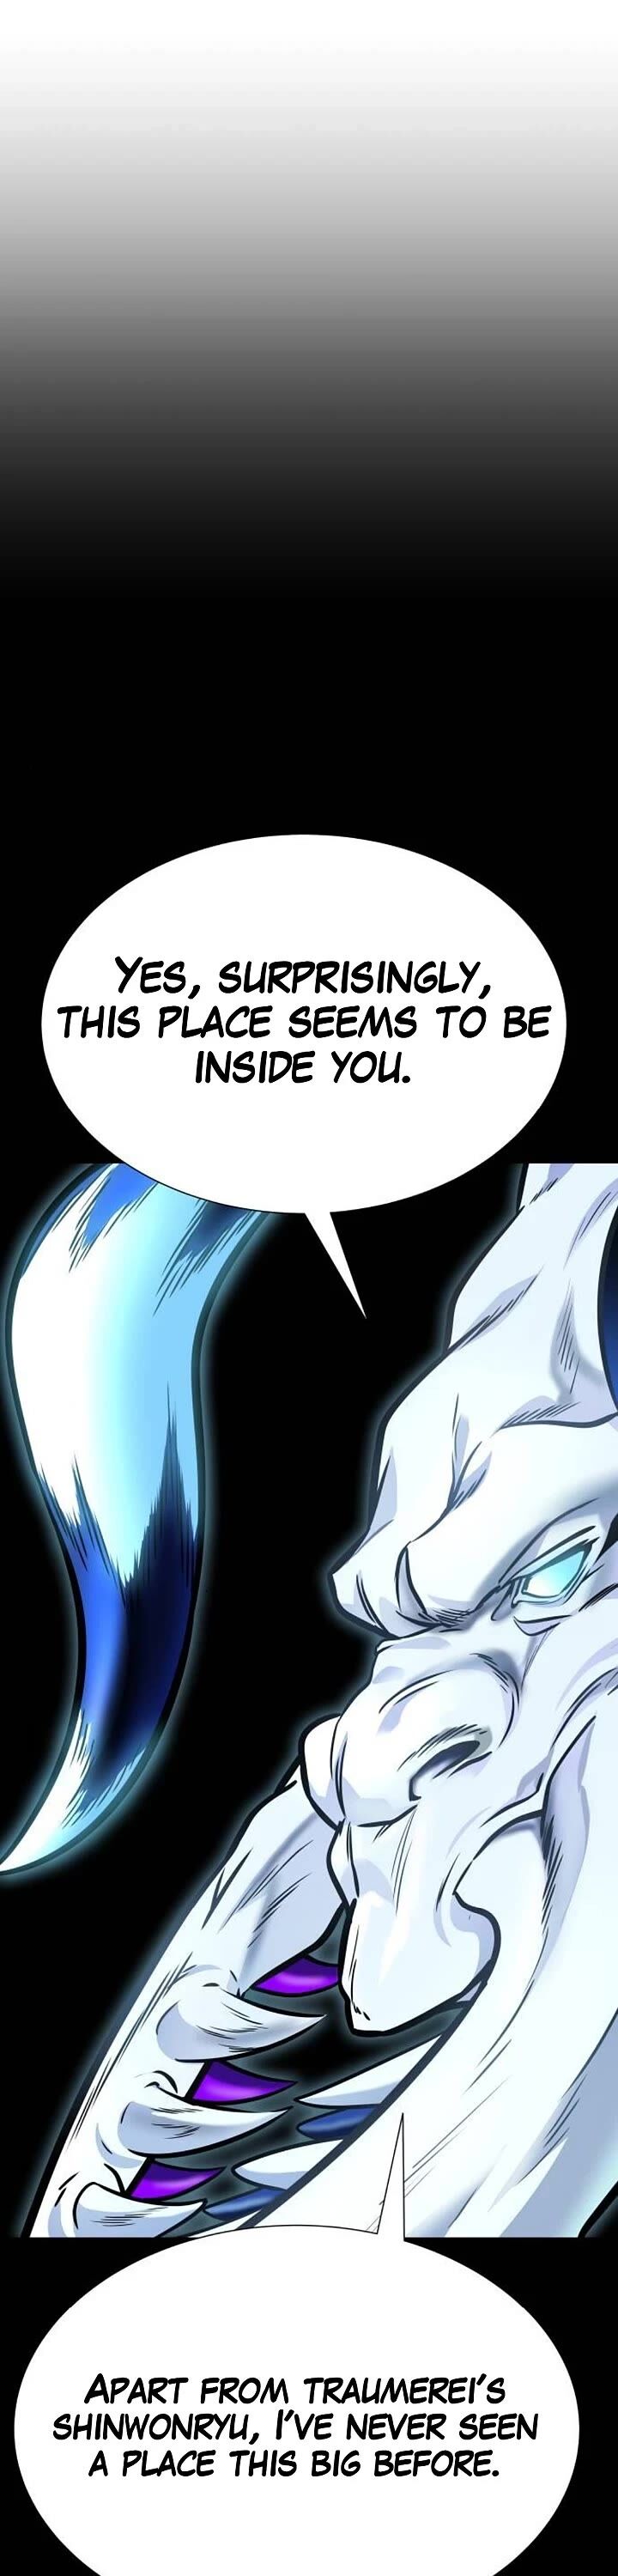 Tower Of God 625 16